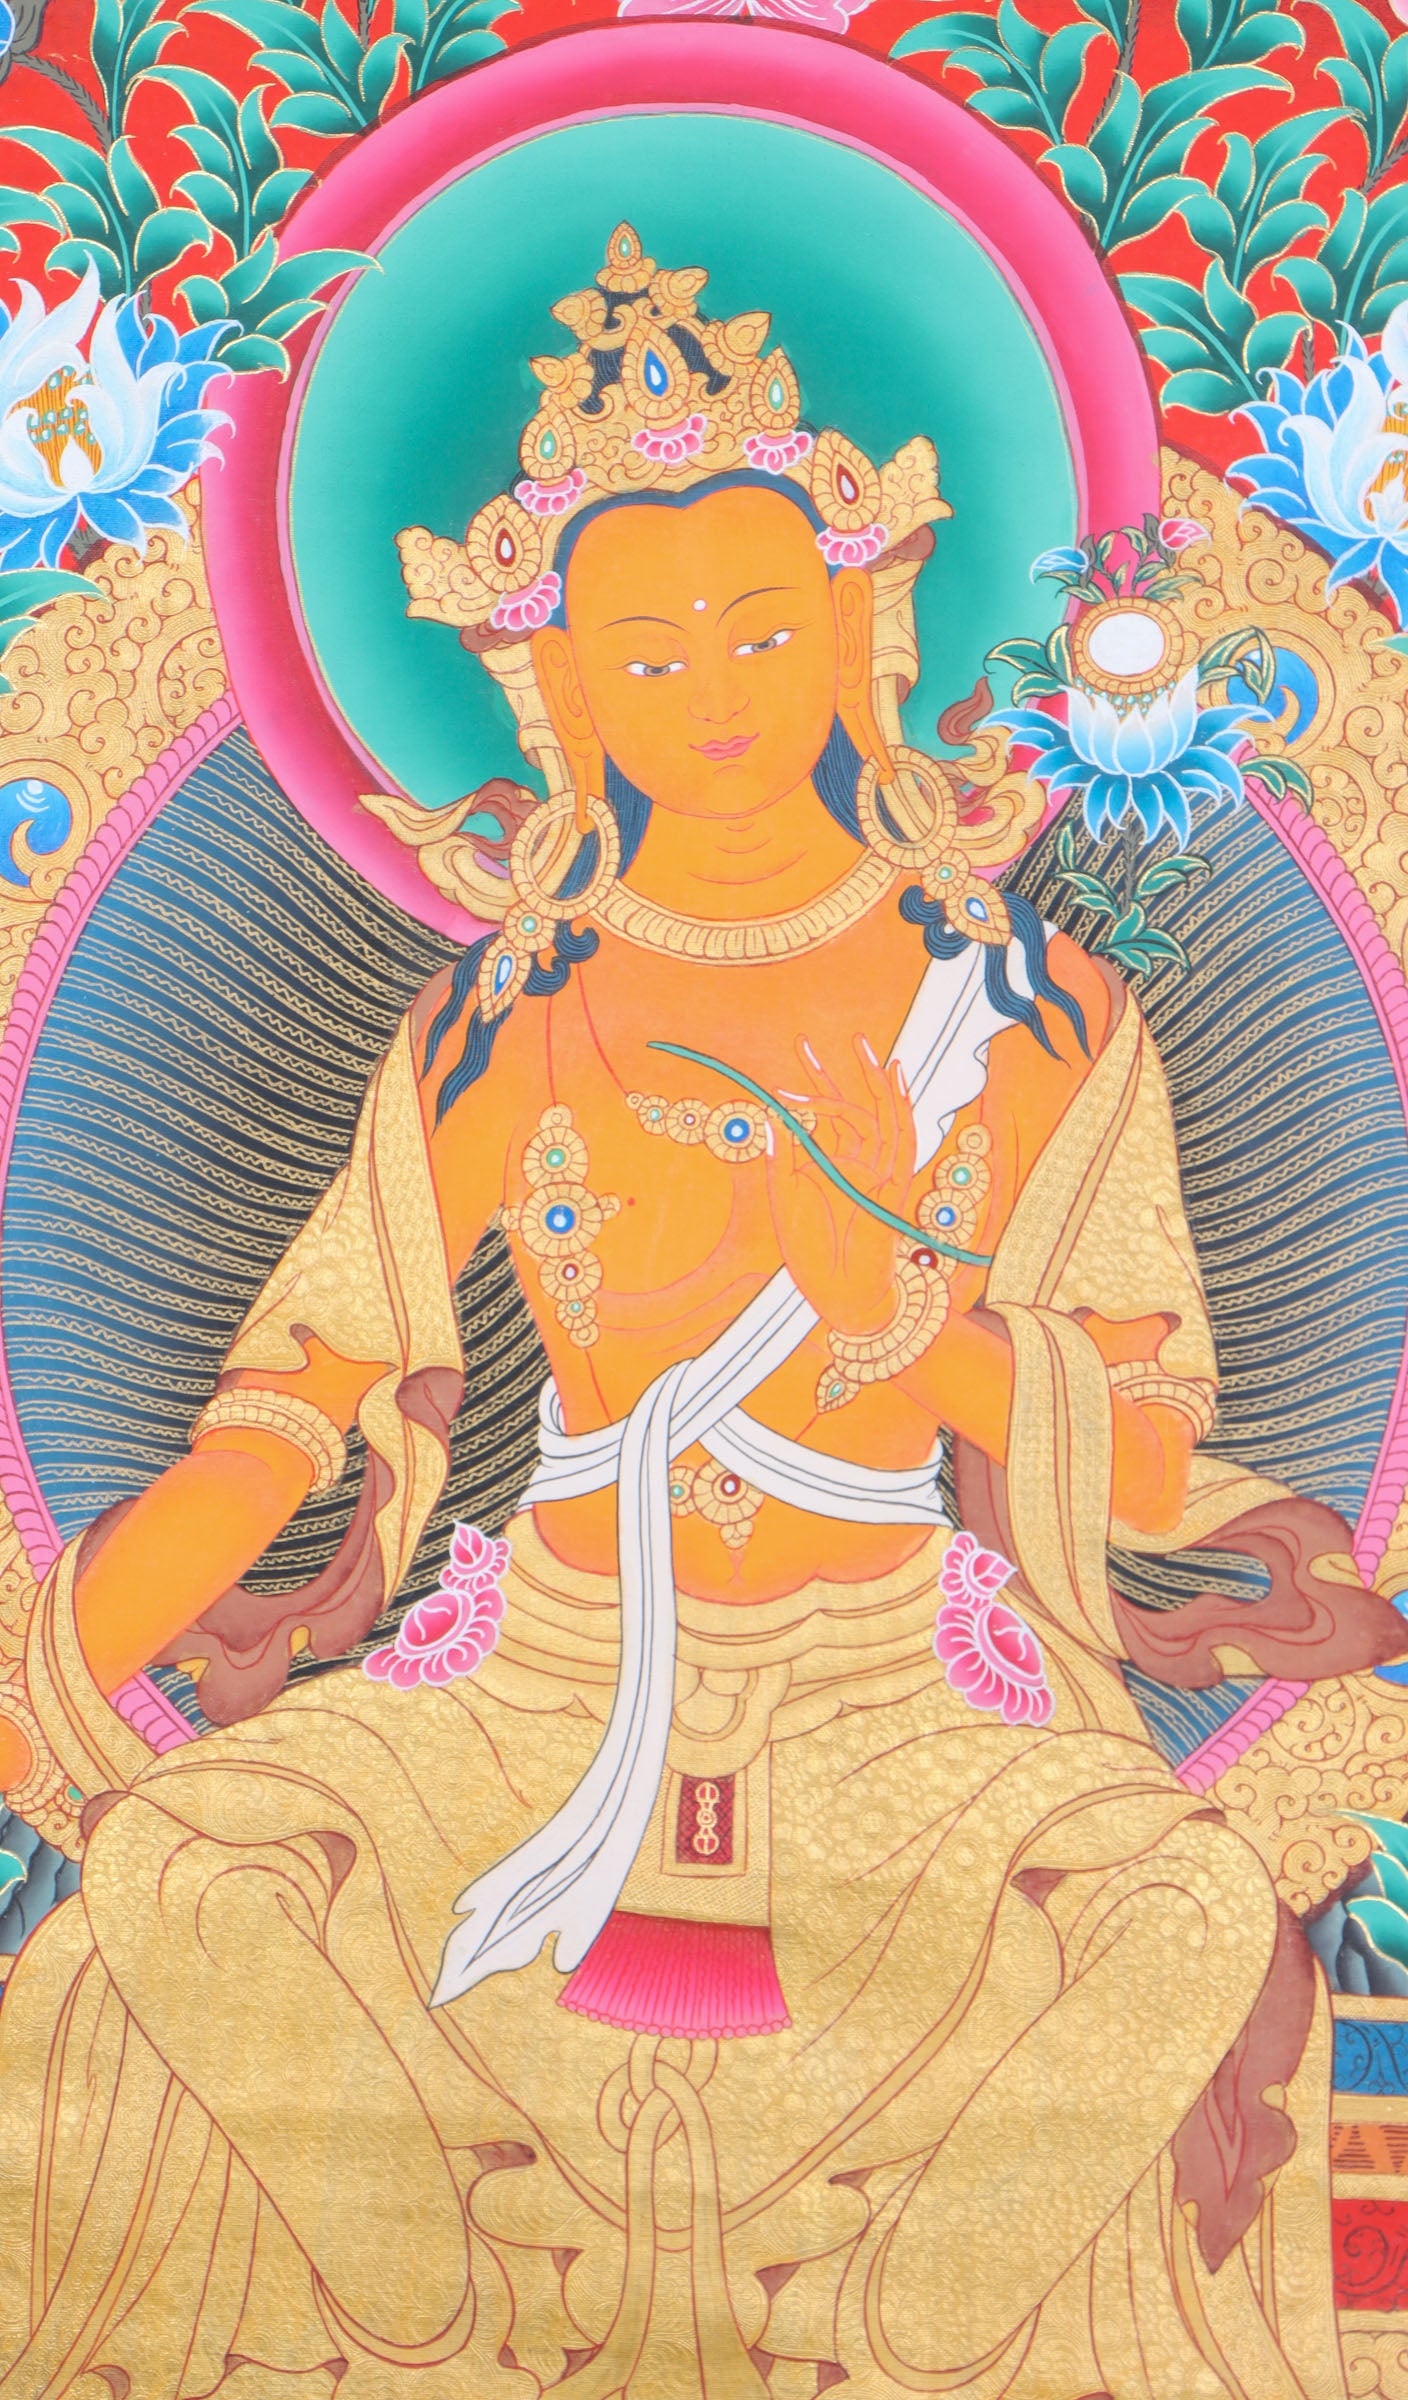 Maitreya Thangka serve as visual aids for contemplation and devotion.